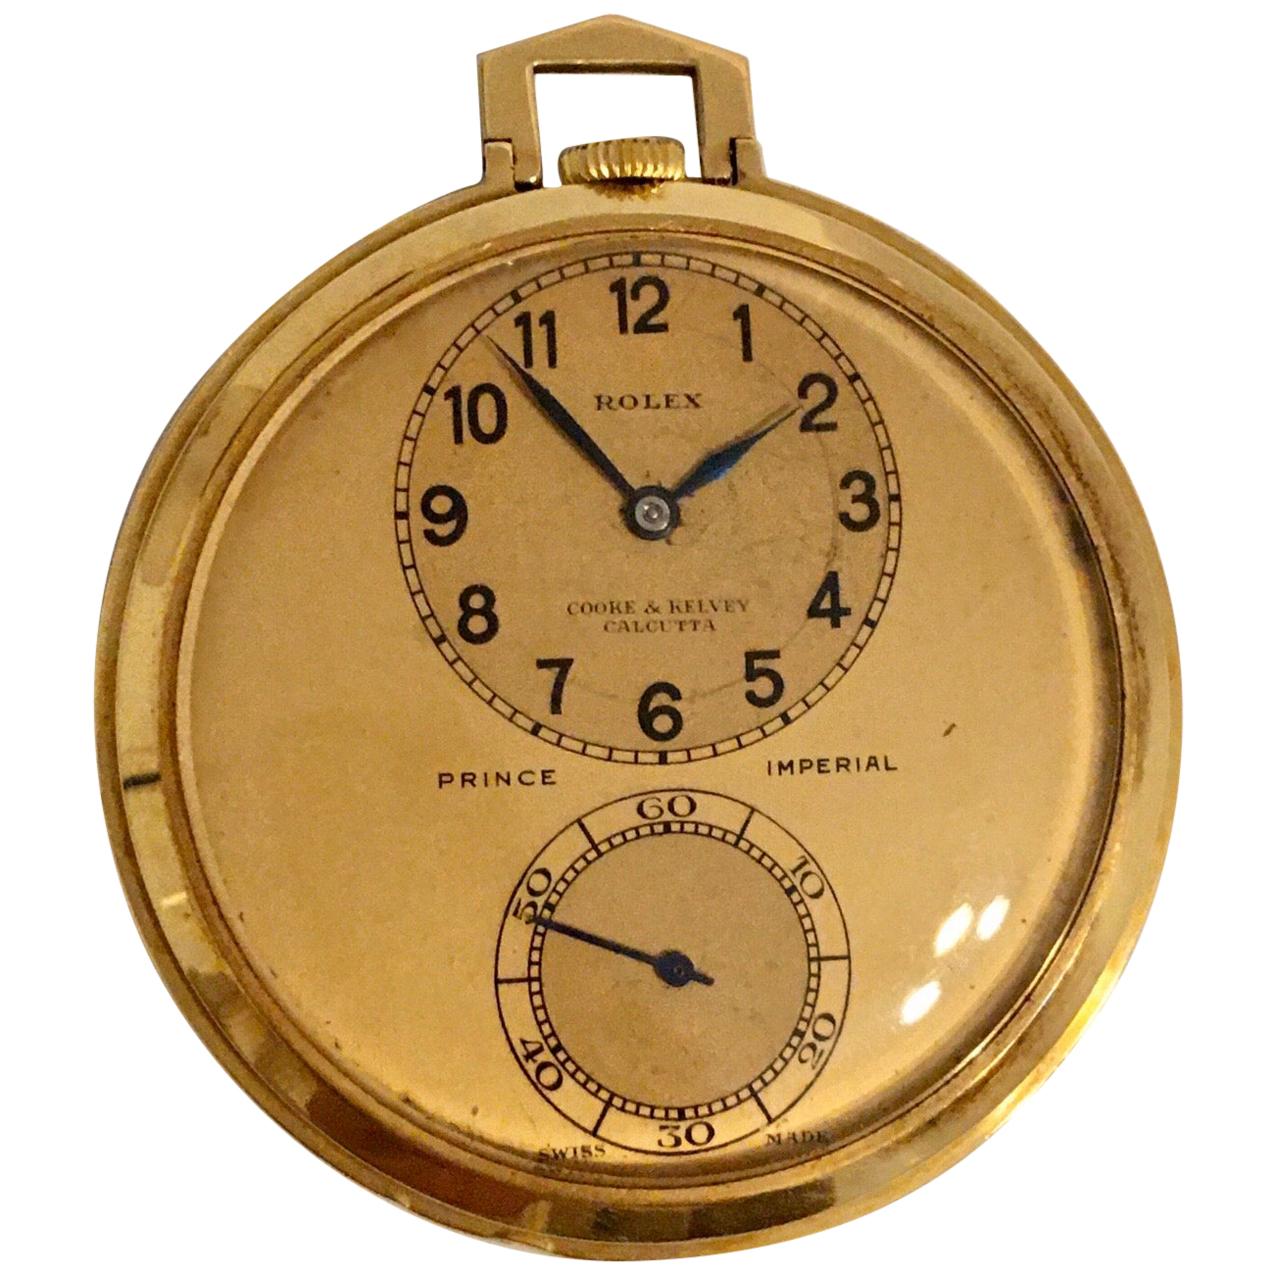 Rare 18k Gold Rolex Observatory Prince Imperial Dress Pocket Watch, circa 1950s For Sale